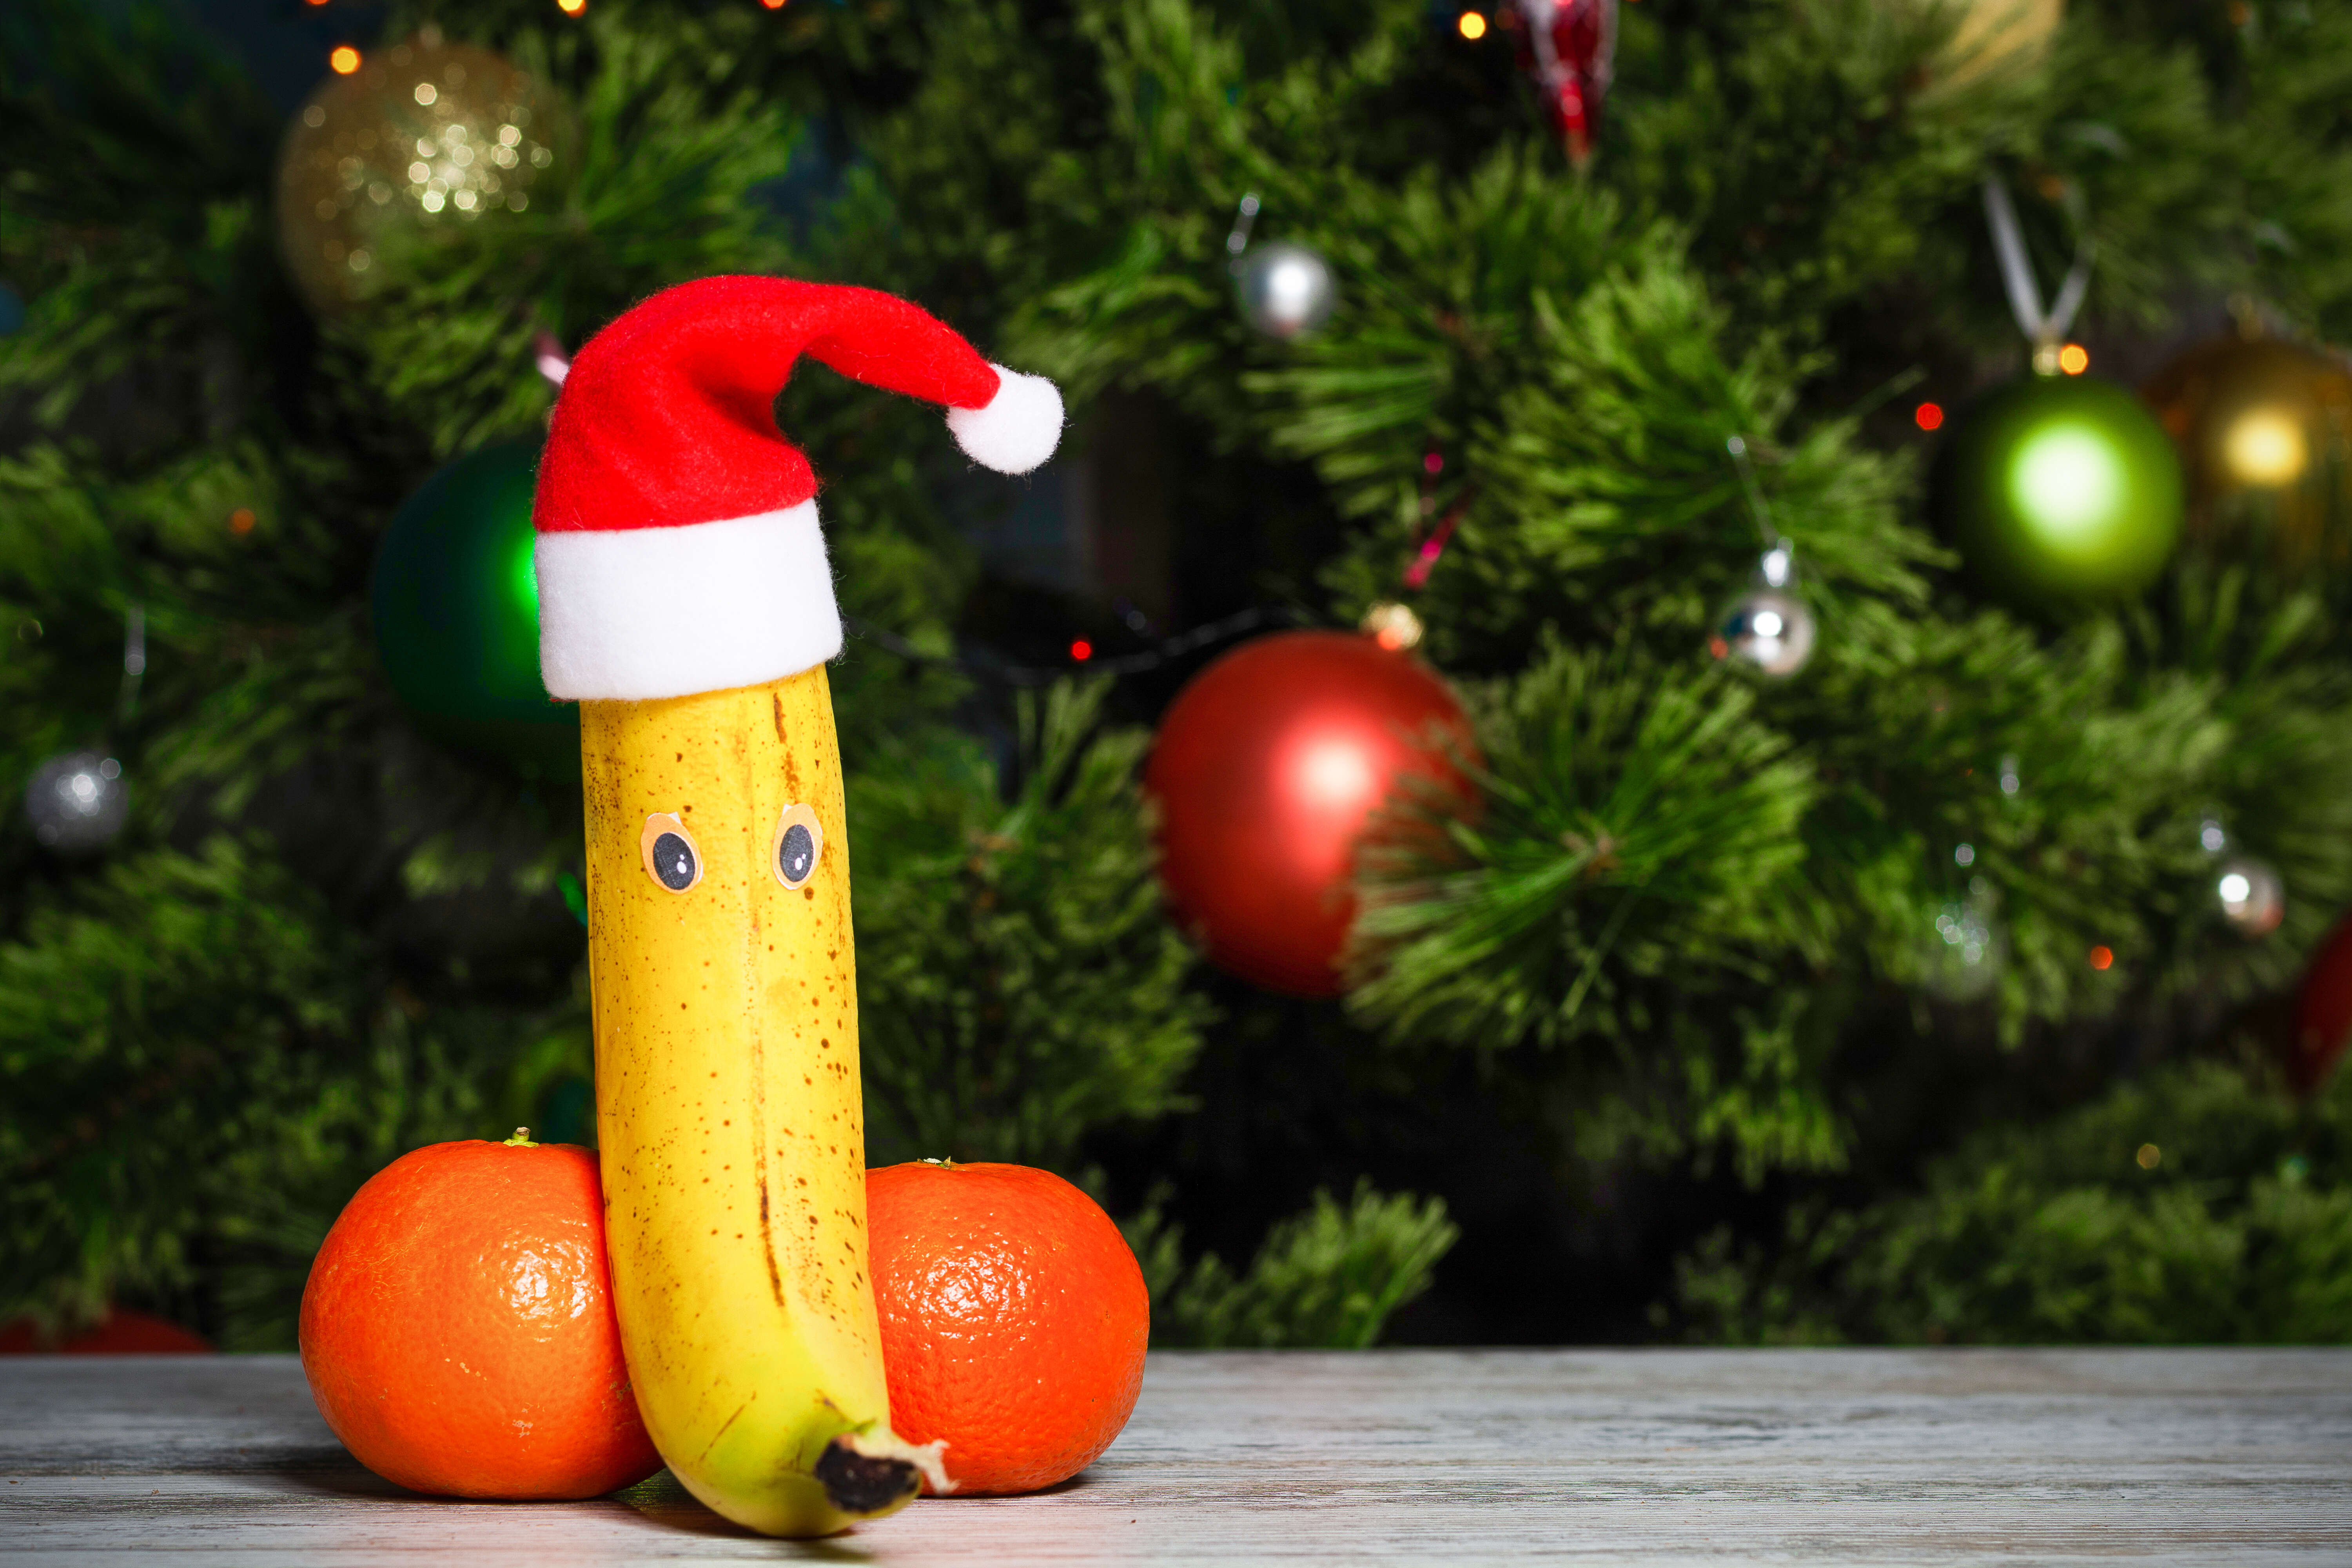 A banana in a Christmas hat and two tangerines with eyes with a Christmas tree in the background. Front view, place for text, copy space.